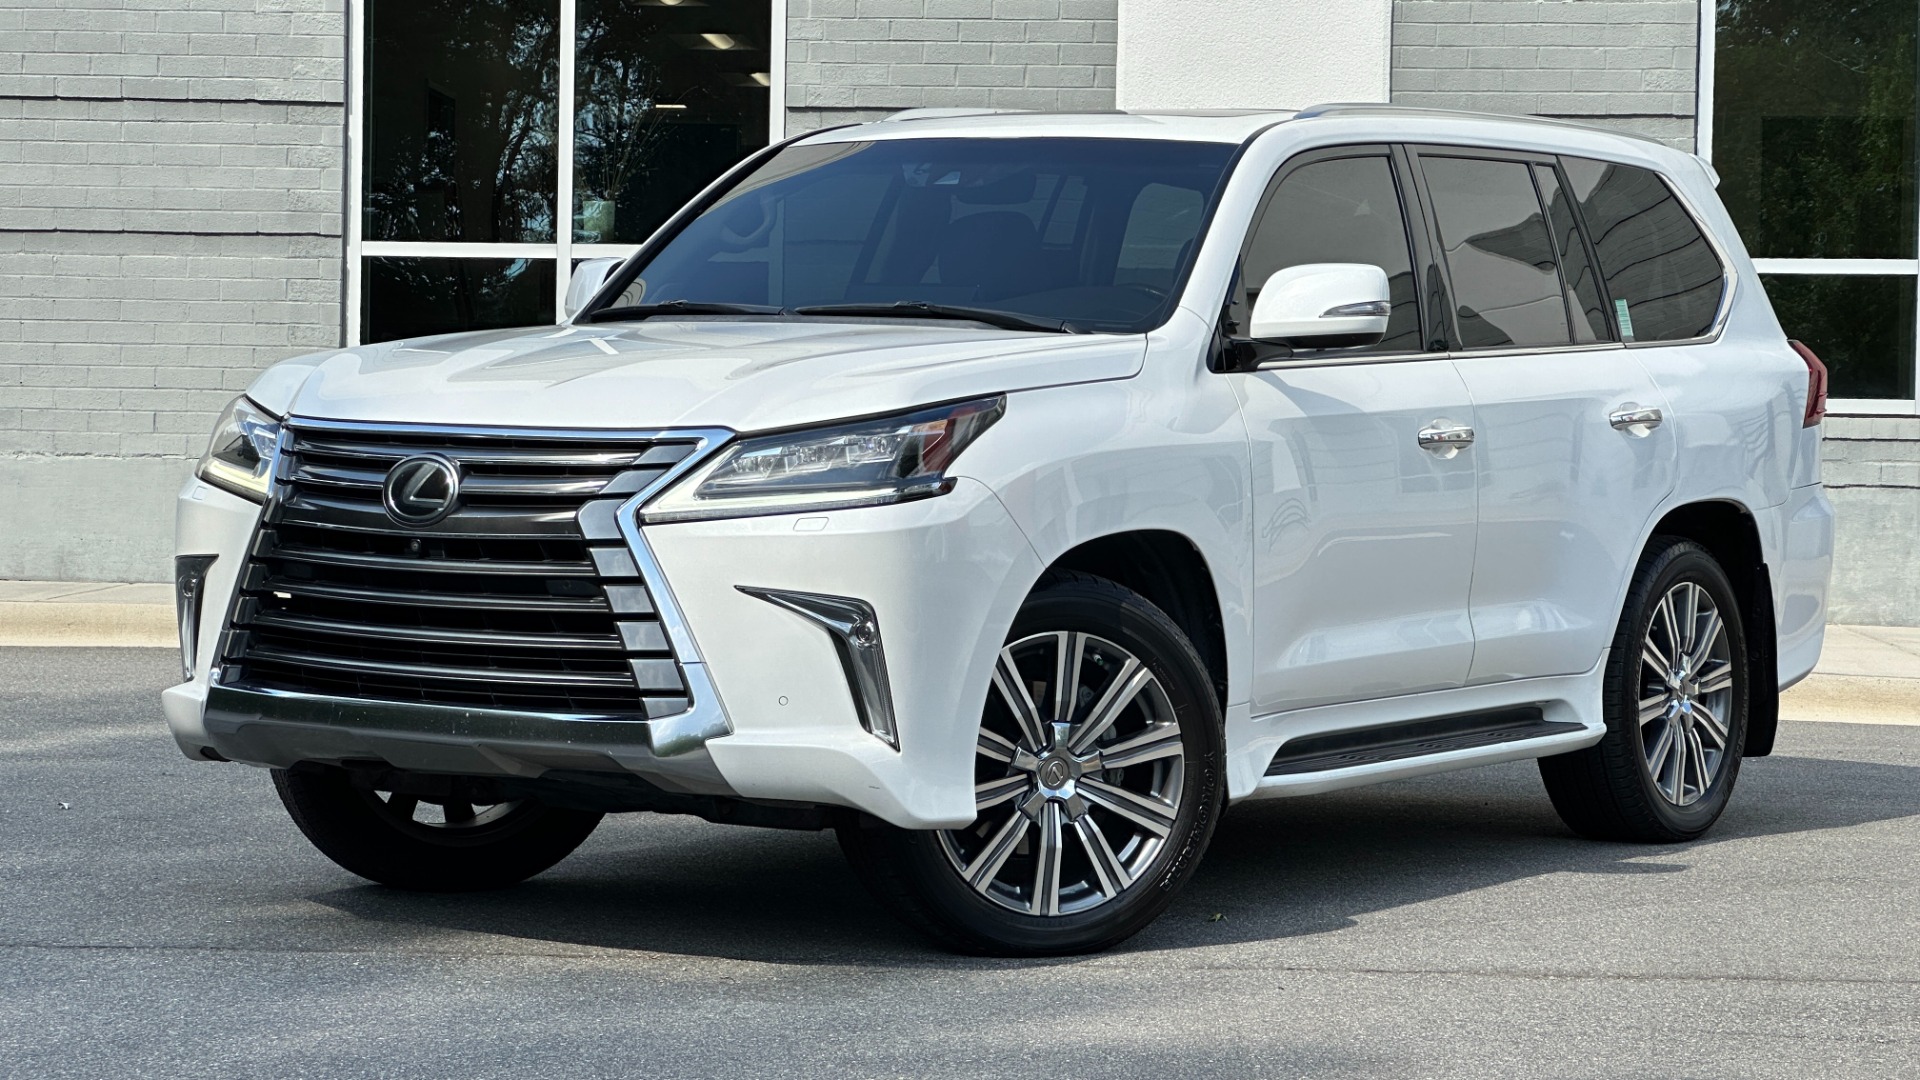 Used 2017 Lexus LX LX 570 LUXURY / MARK LEVINSON / REAR DVD SCREENS / 3 ROW / 4WD for sale $46,995 at Formula Imports in Charlotte NC 28227 1